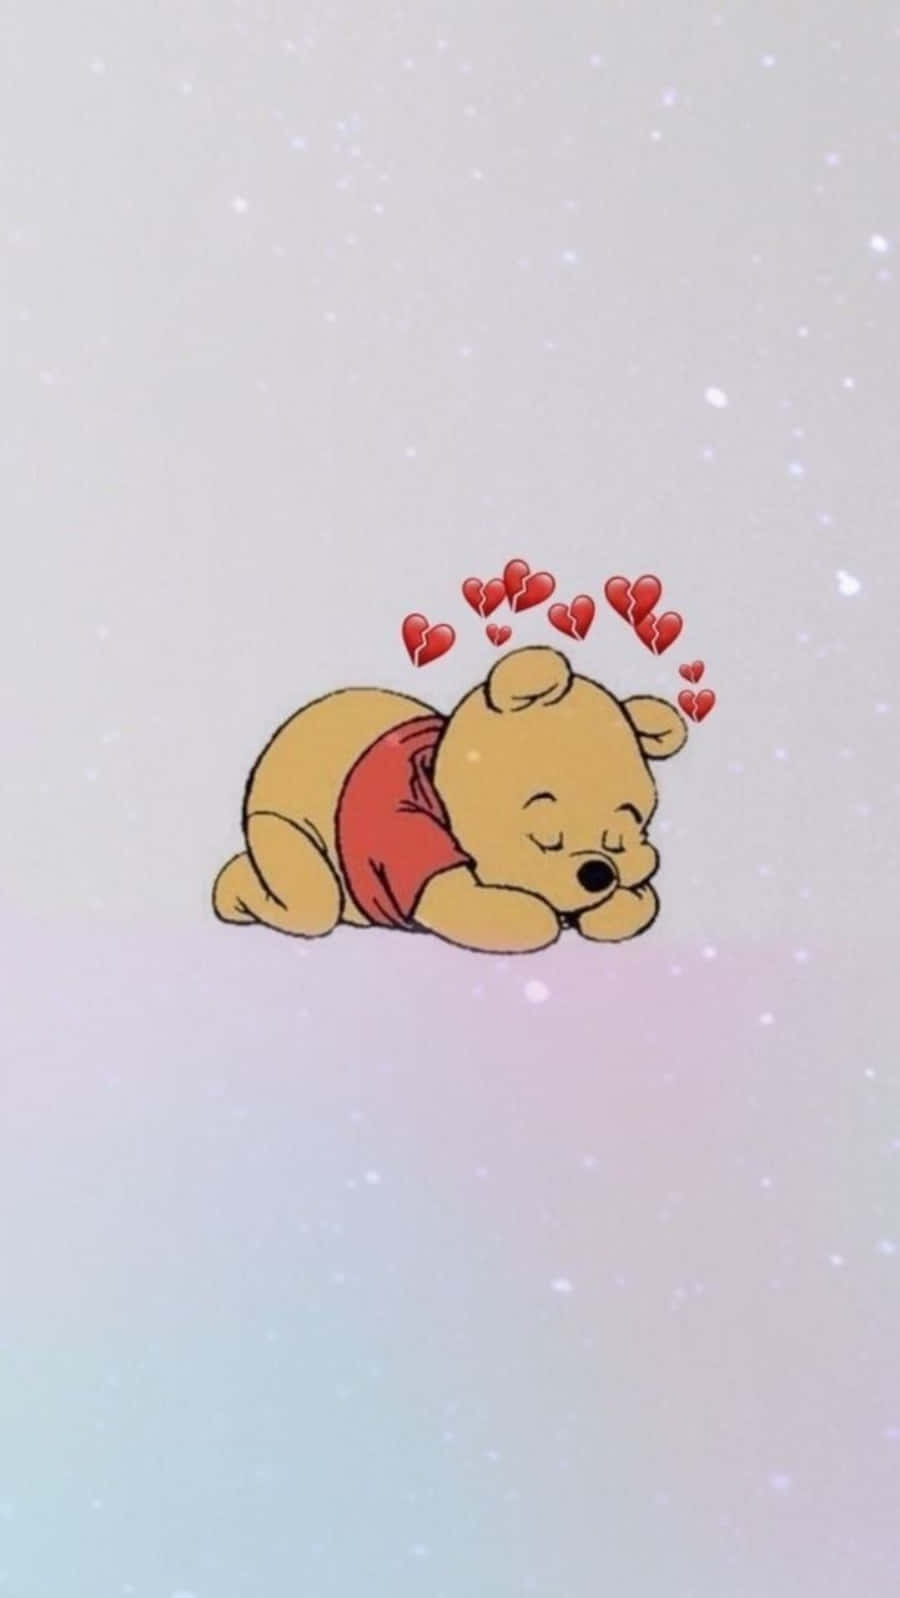 Download Cute Profile Winnie The Pooh Sleeping Pictures ...